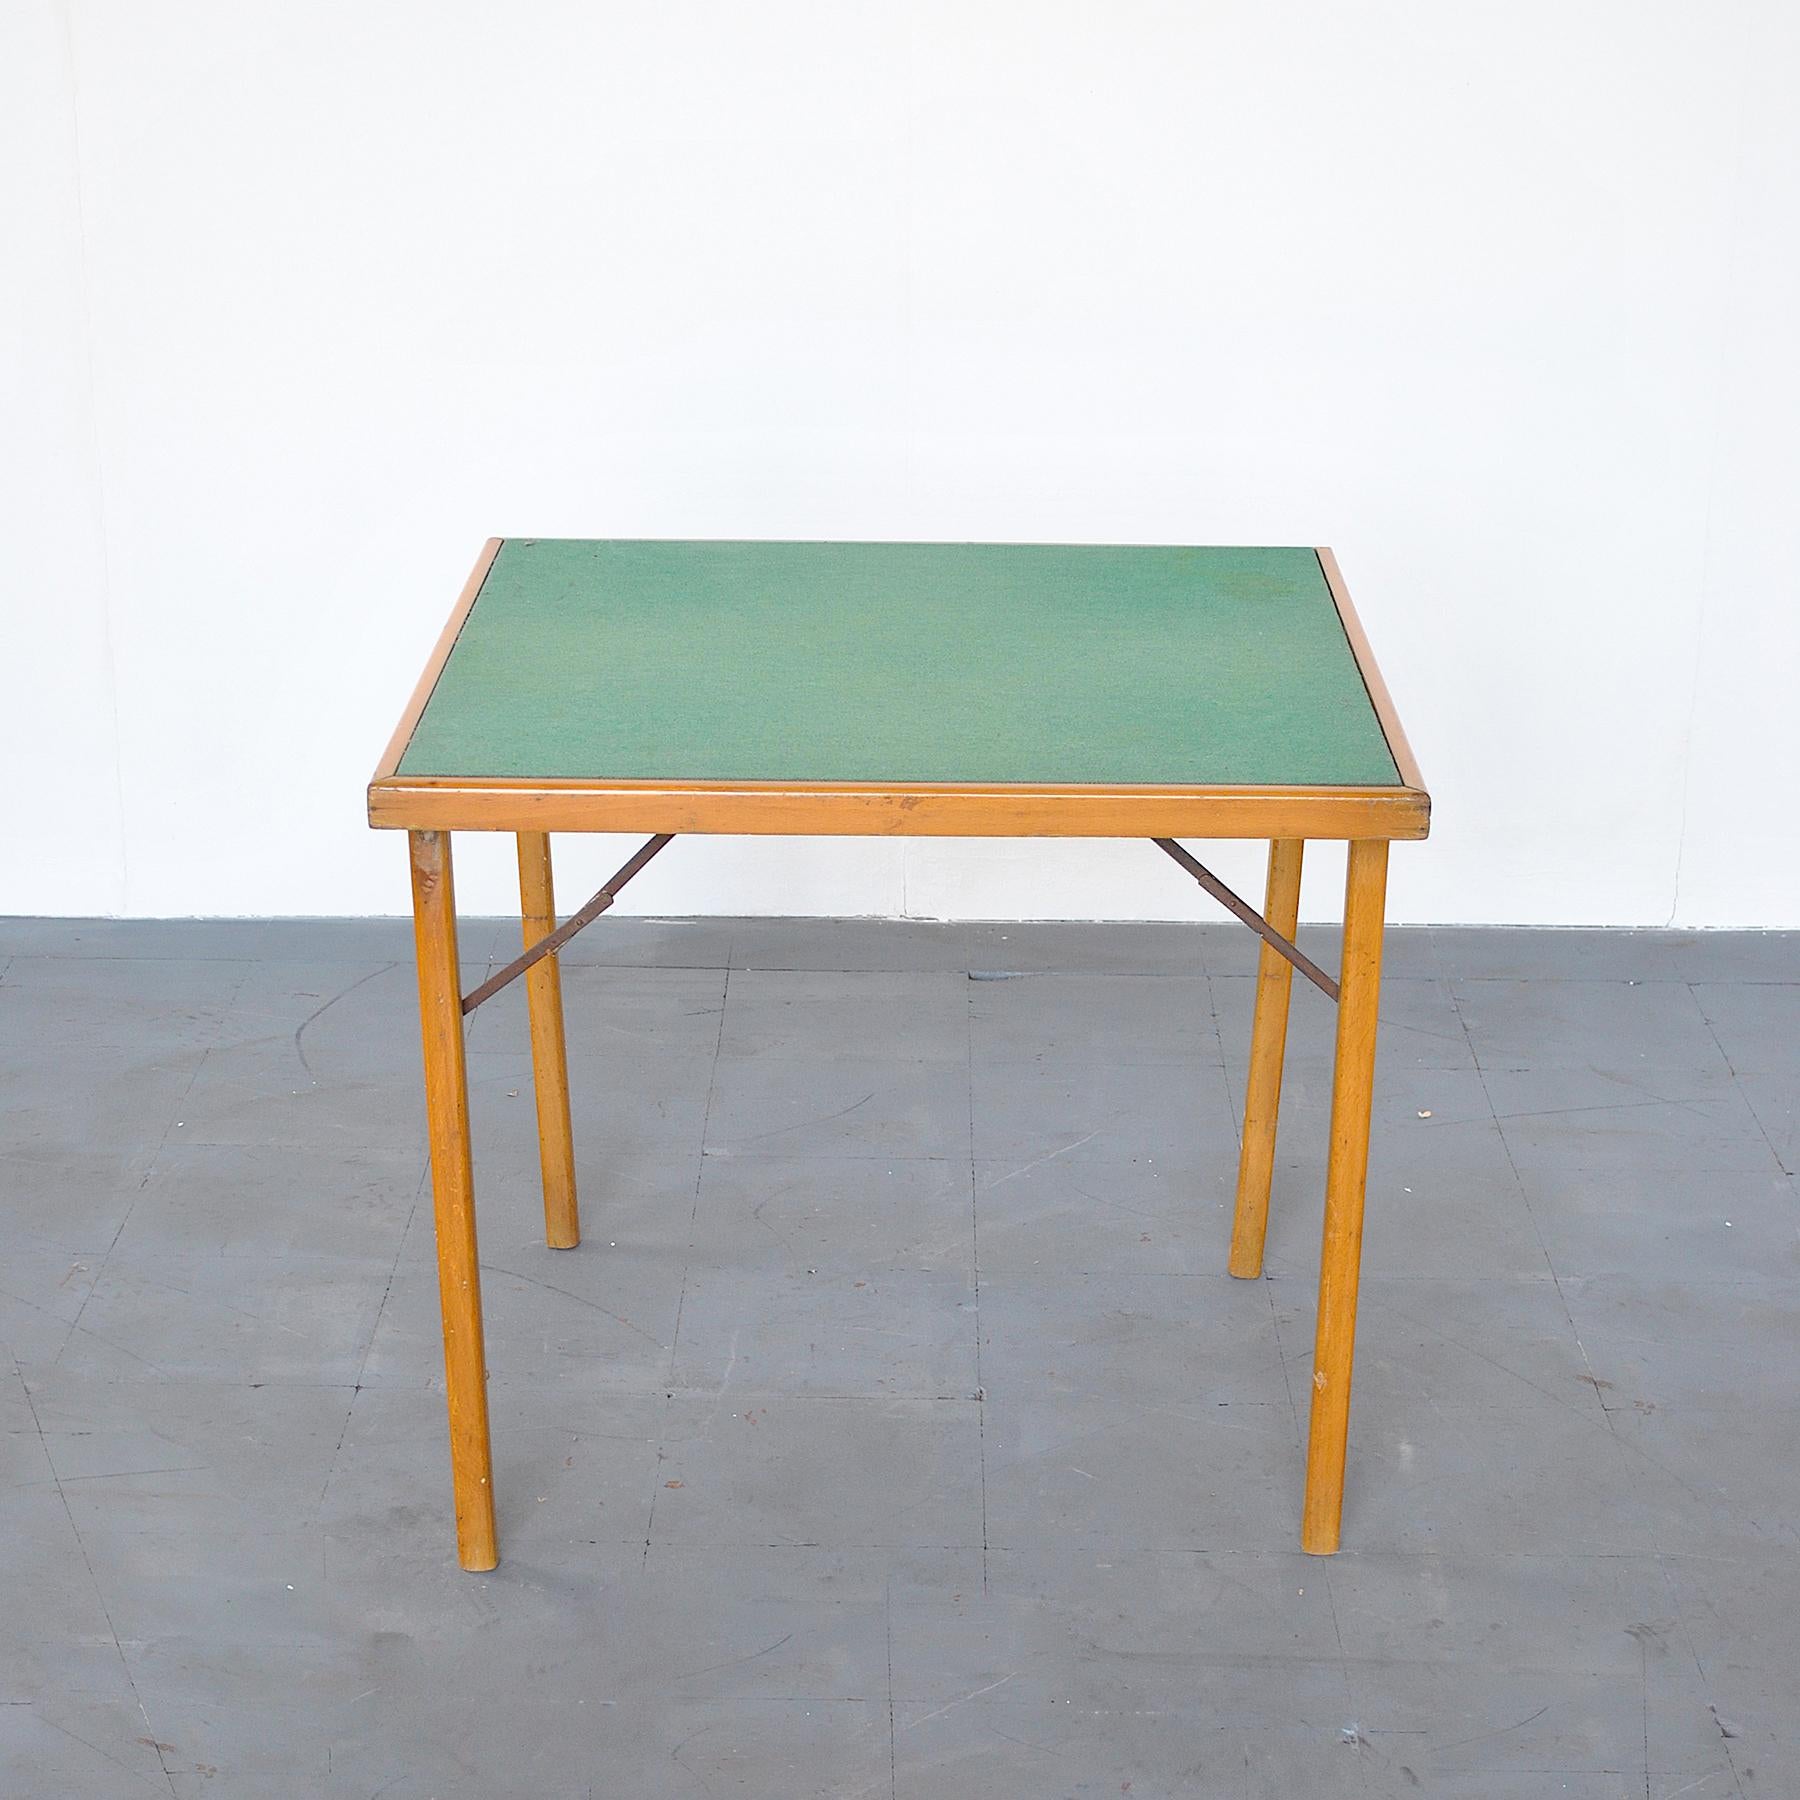 Closeup game table in wood with green cloth on the floor.